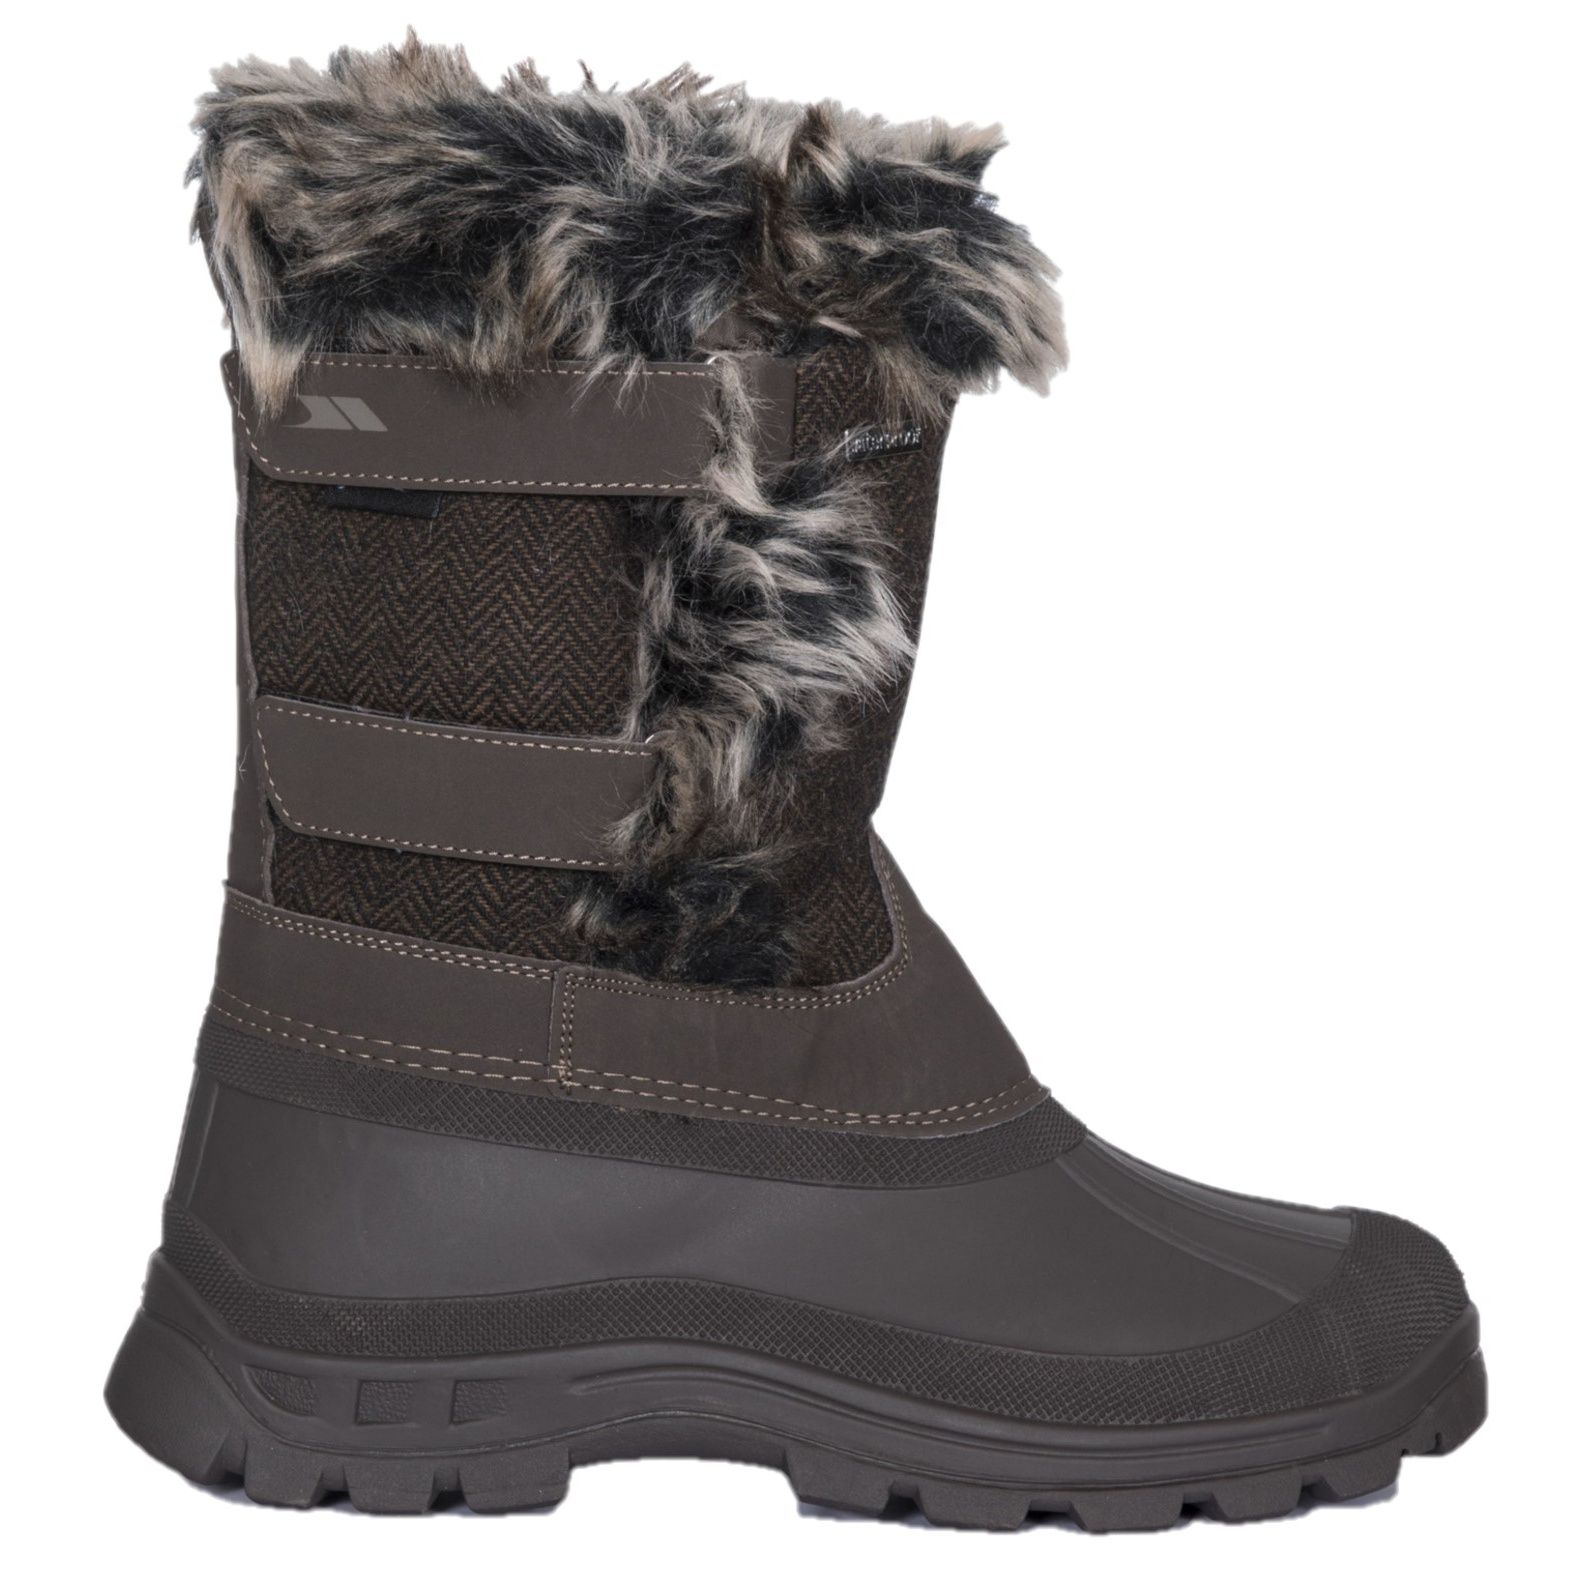 Womens snowboot. Insulated and warm fleece lined. Water resistant textile upper. Waterproof rubber shell outsole. Adjustable touch fastening. Synthetic fur trim. Upper: PU/Textile/Synthetic Fur, Lining: Fleece, Outsole: Rubber.